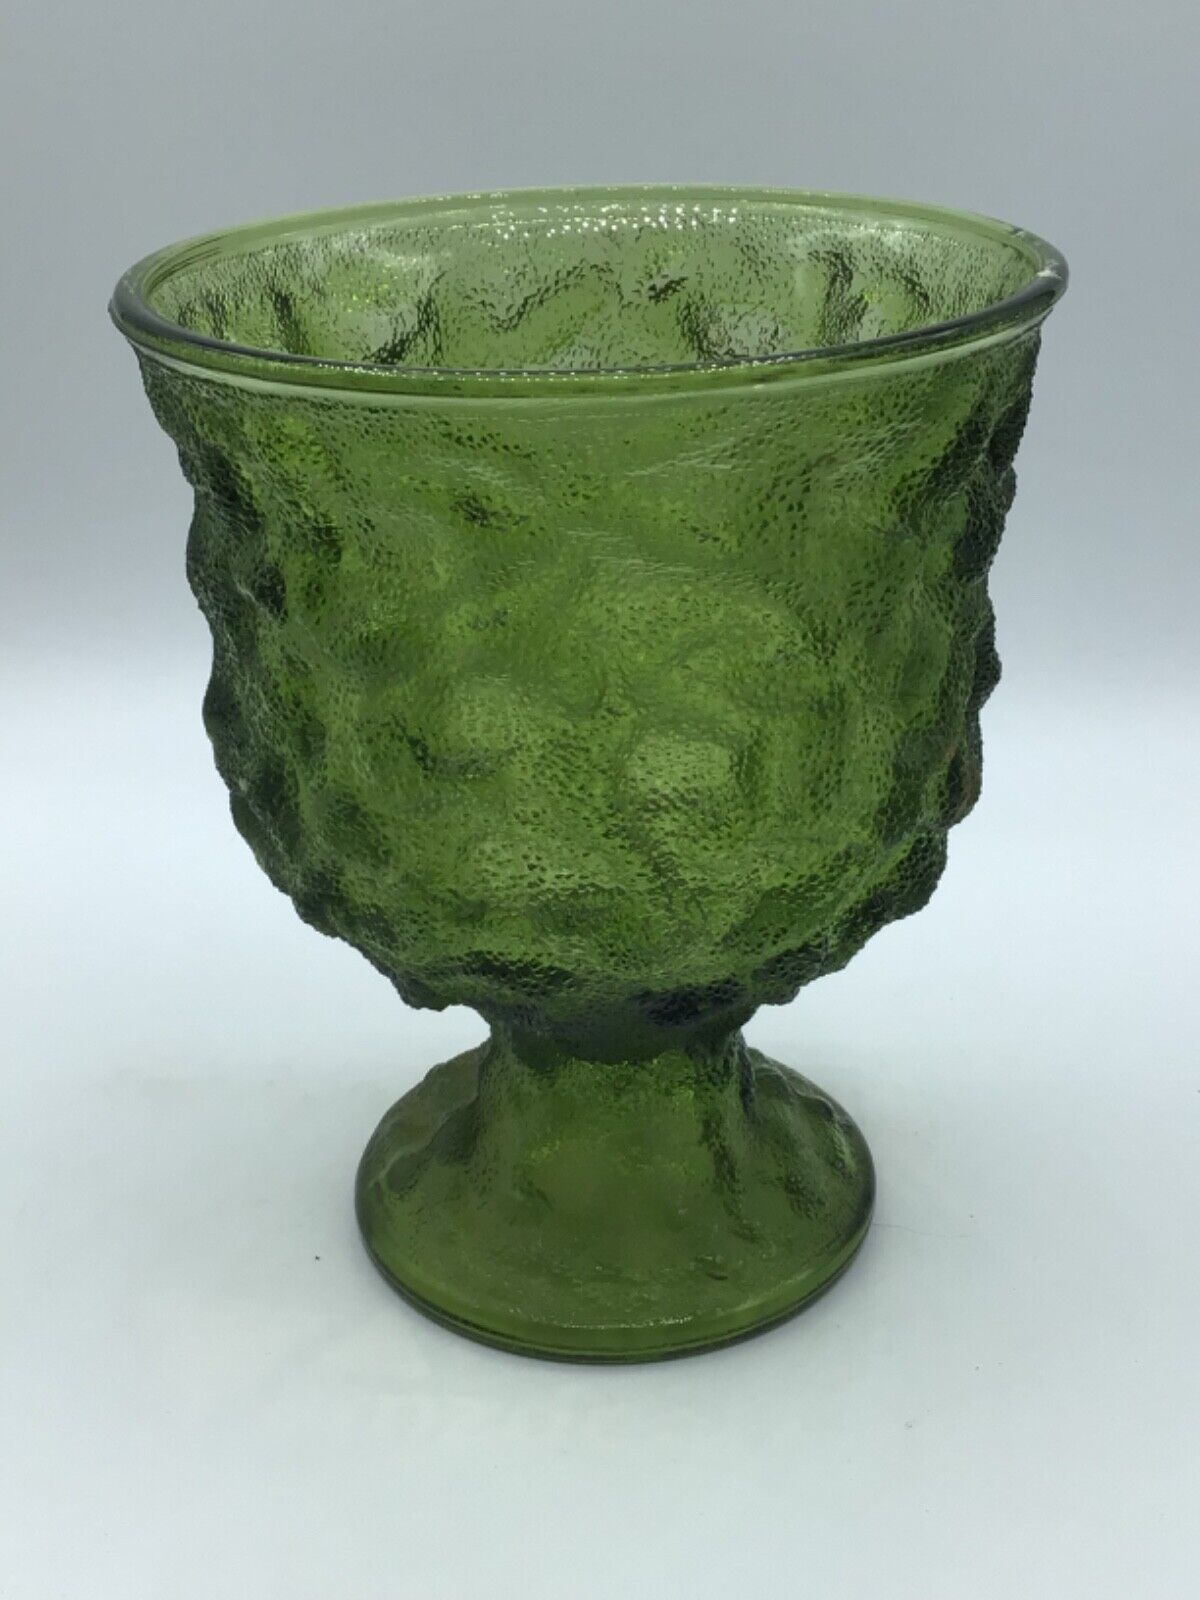 intage E.O. Brody Co Green Crinkle Textered Glass Pedestal Footed Compote Vase